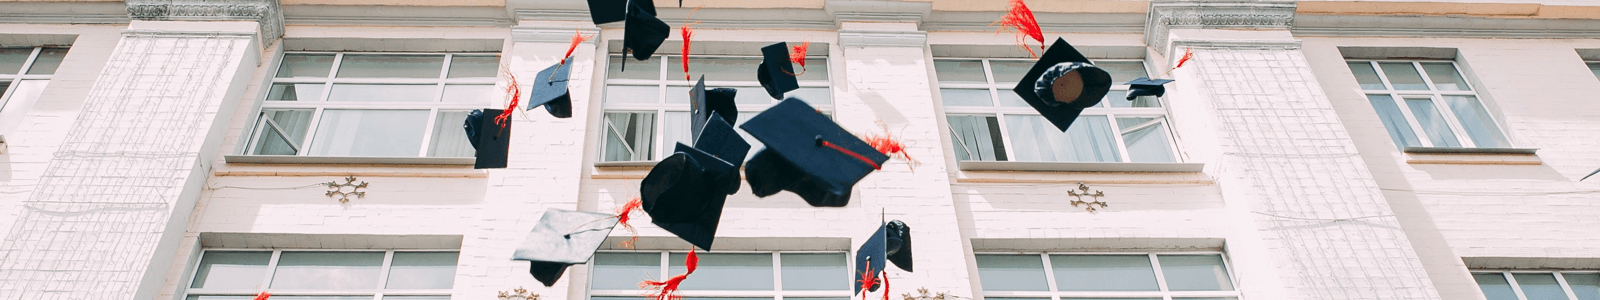 graduation caps being thrown in the air